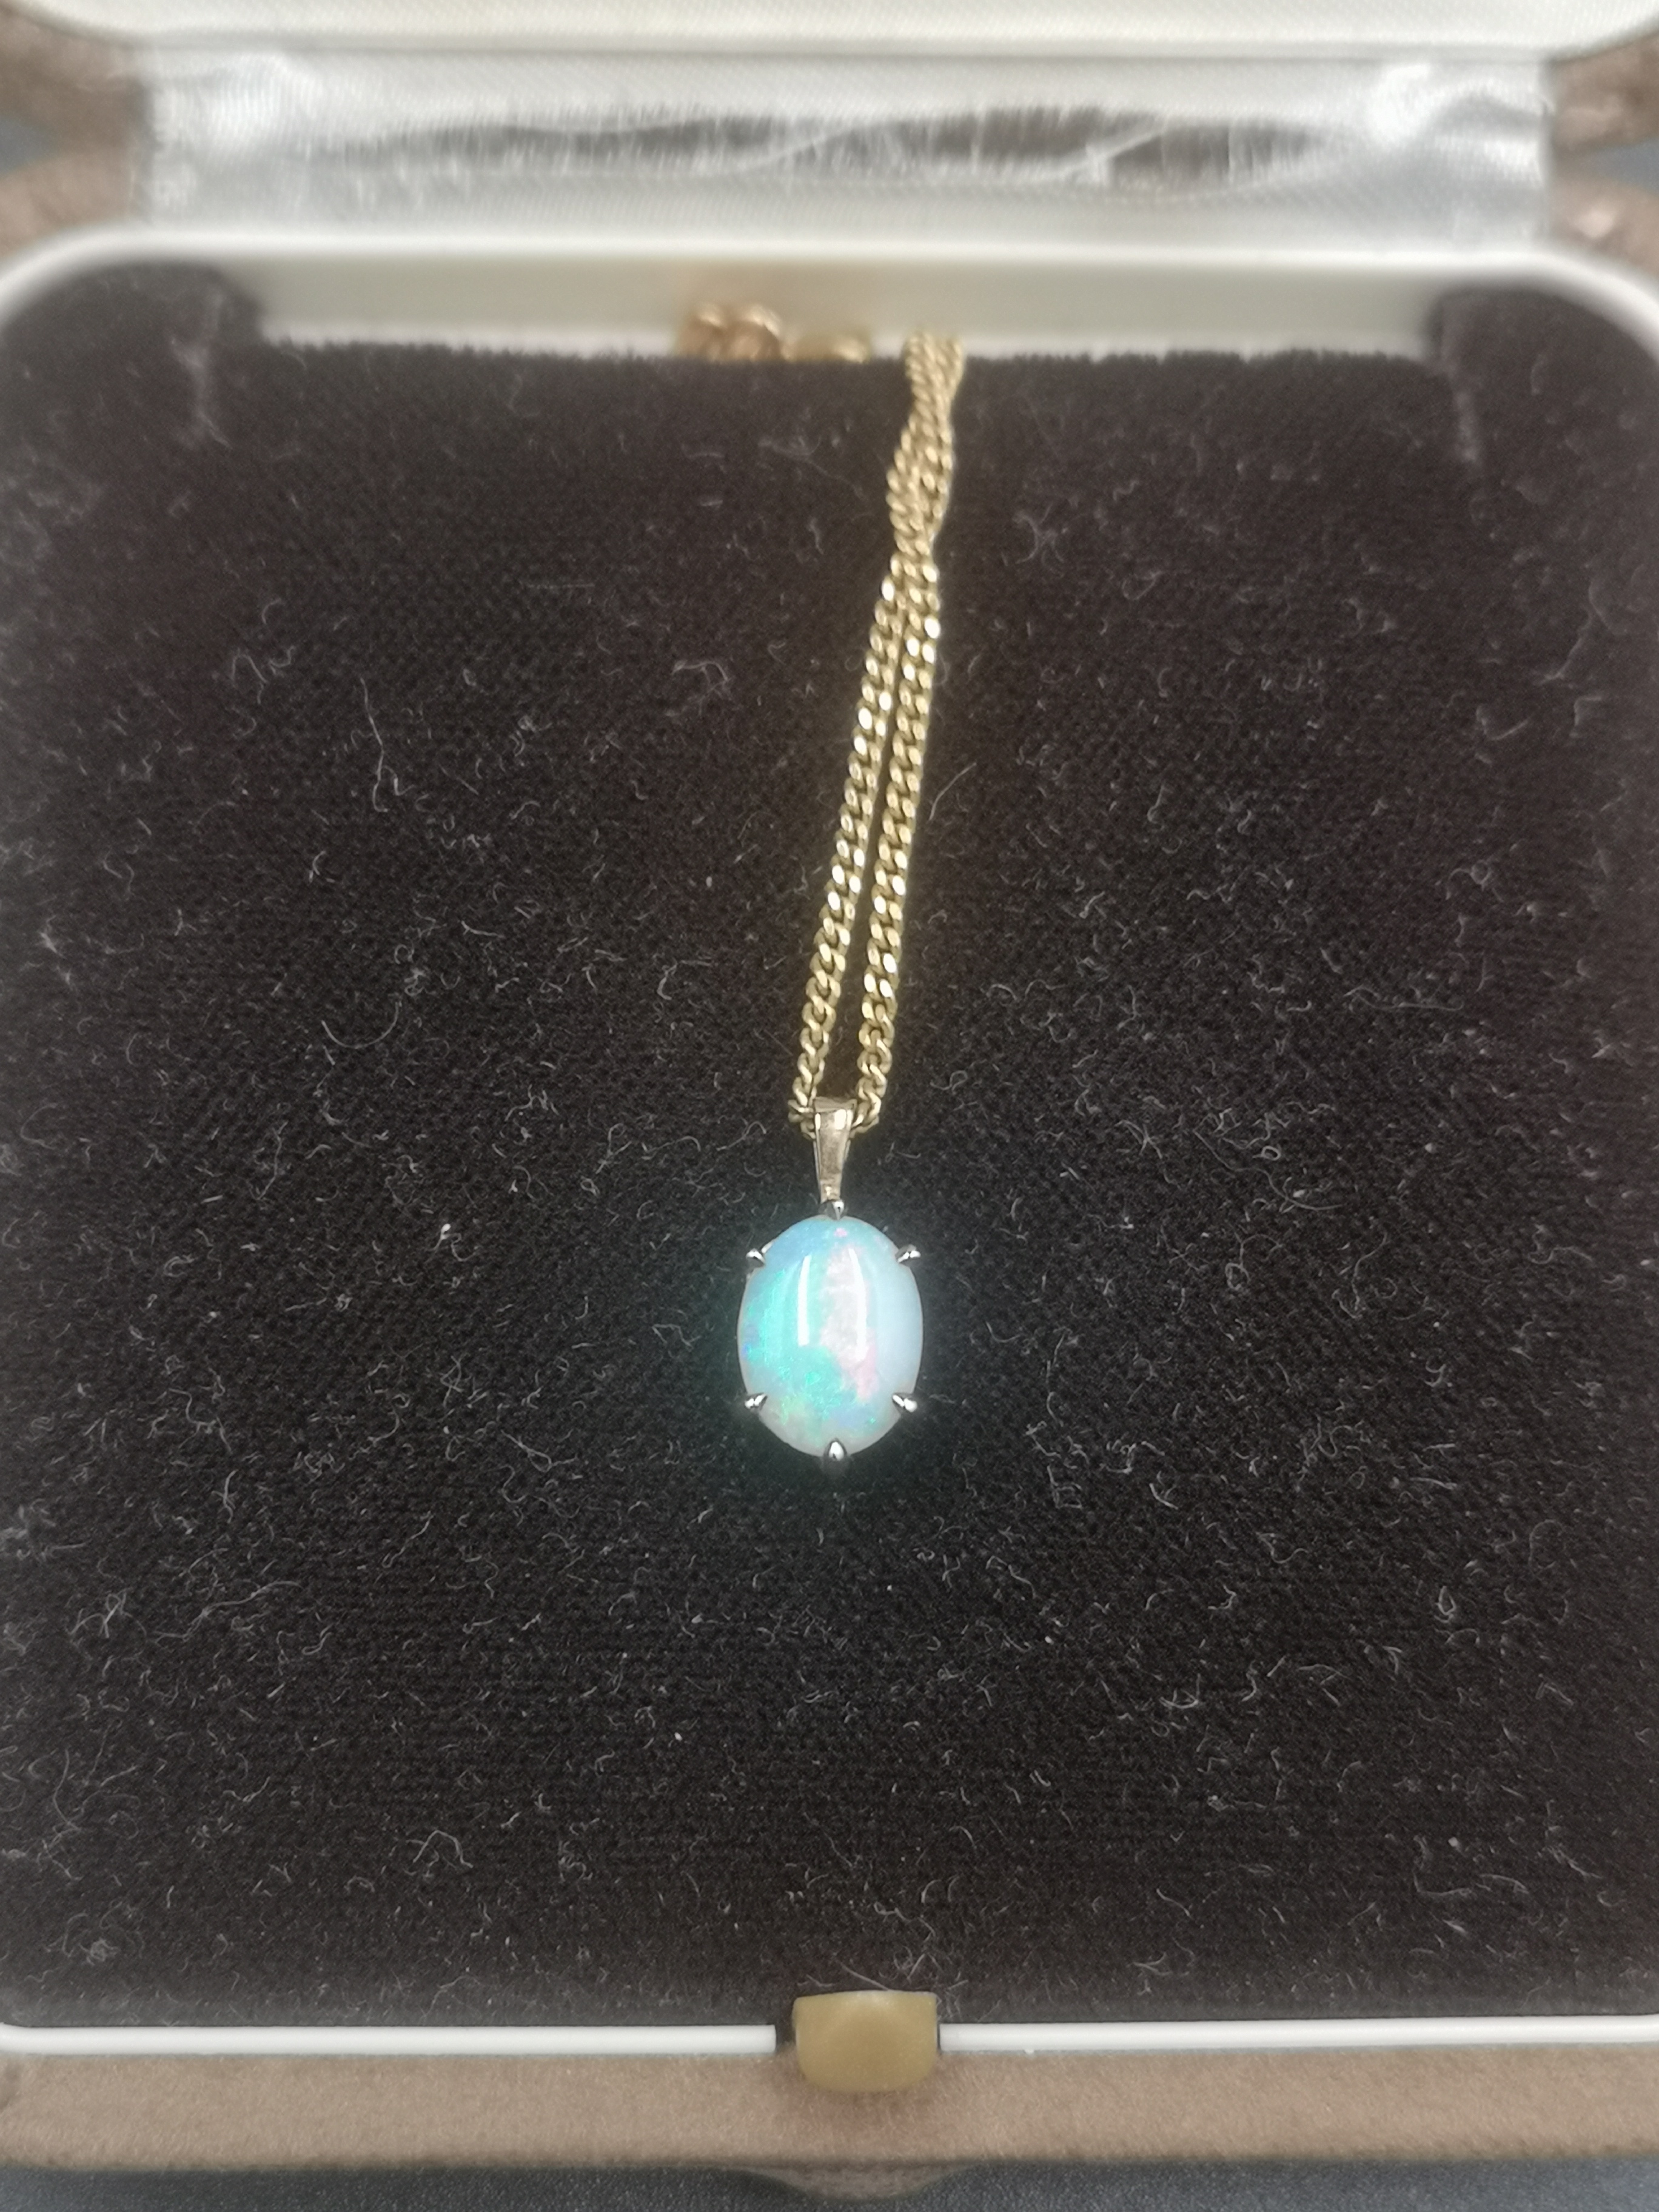 9ct gold necklace with 9ct and opal pendant - Image 3 of 3